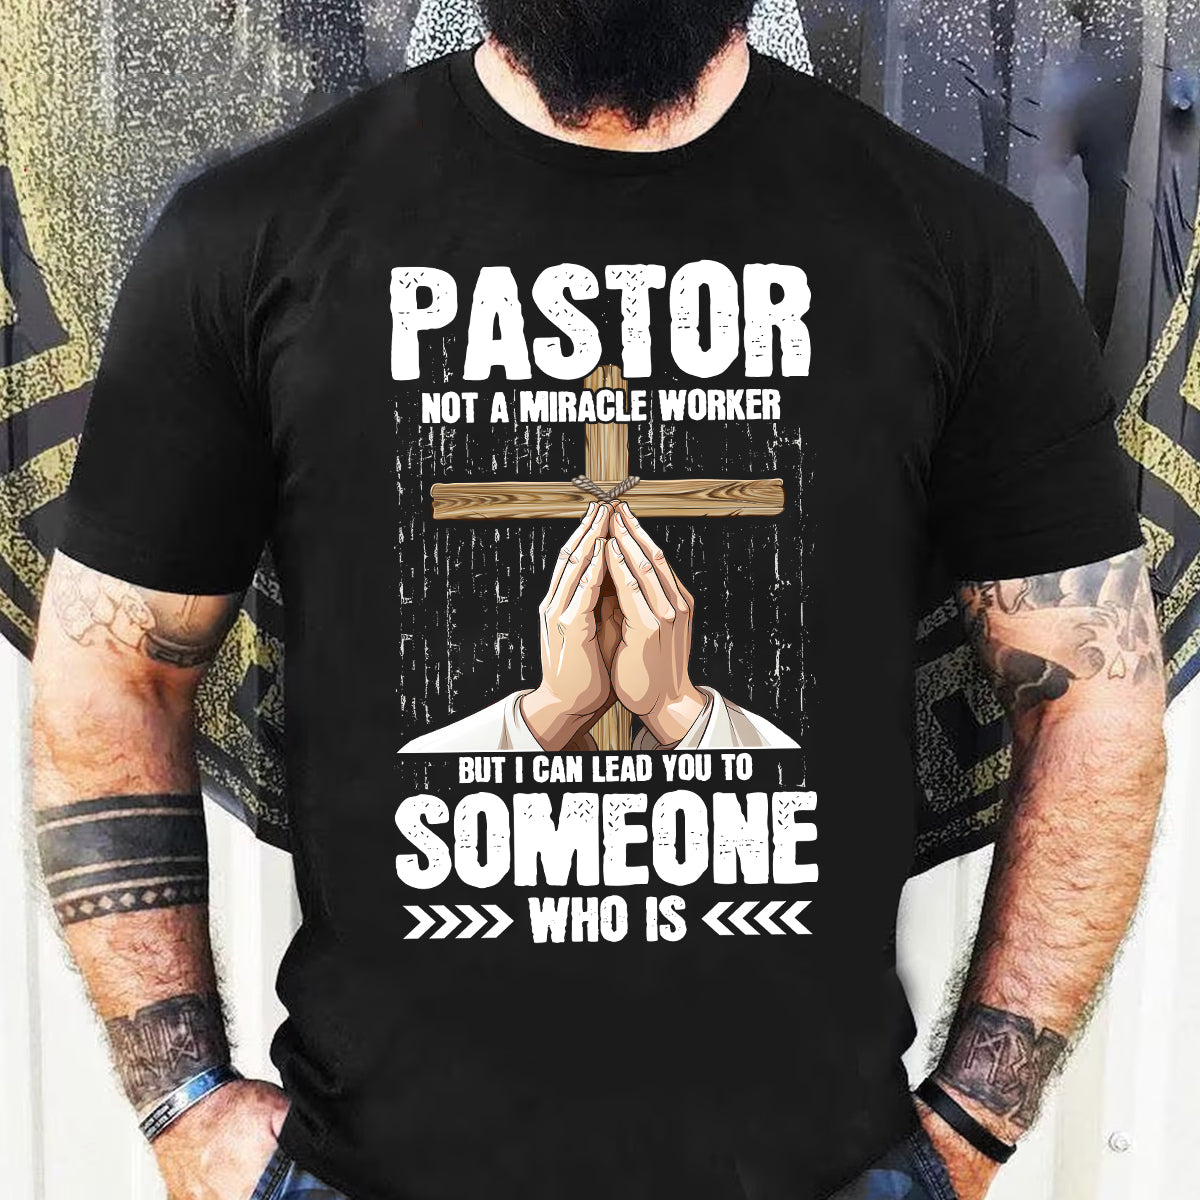 Teesdily | Pastor Not A Miracle Worker But I Can Lead You To Someone Who Is Black Shirt, Jesus Lovers, Unisex Tshirt Hoodie Sweatshirt Size S-5xl / Mug 11-15oz